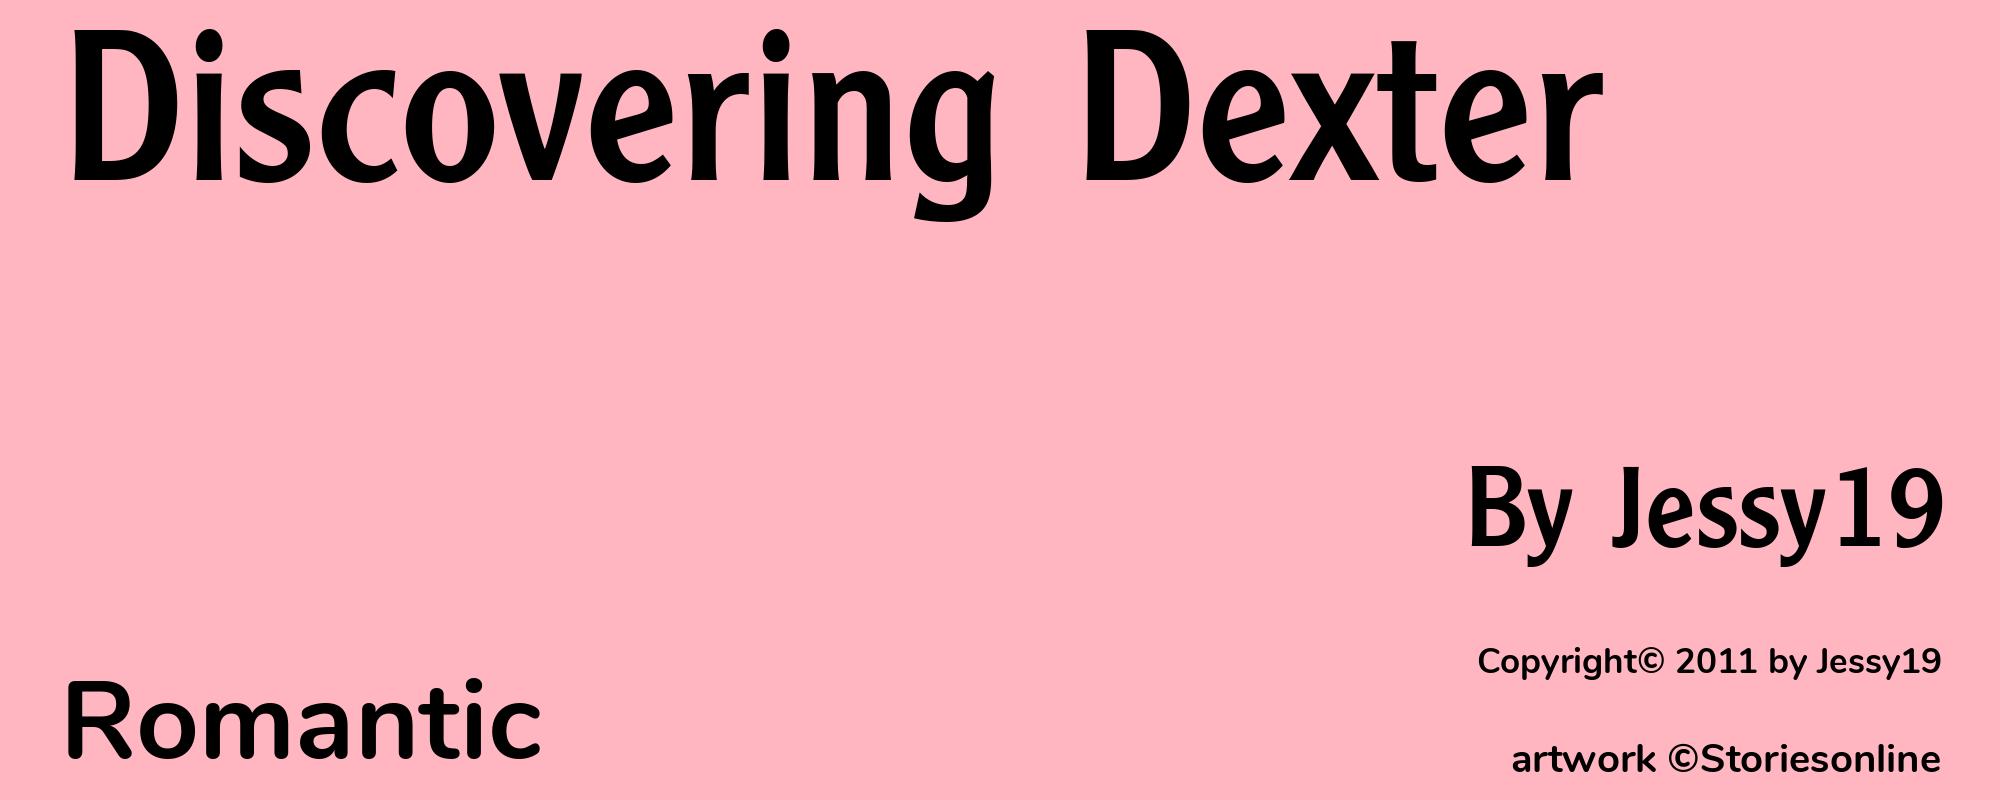 Discovering Dexter - Cover